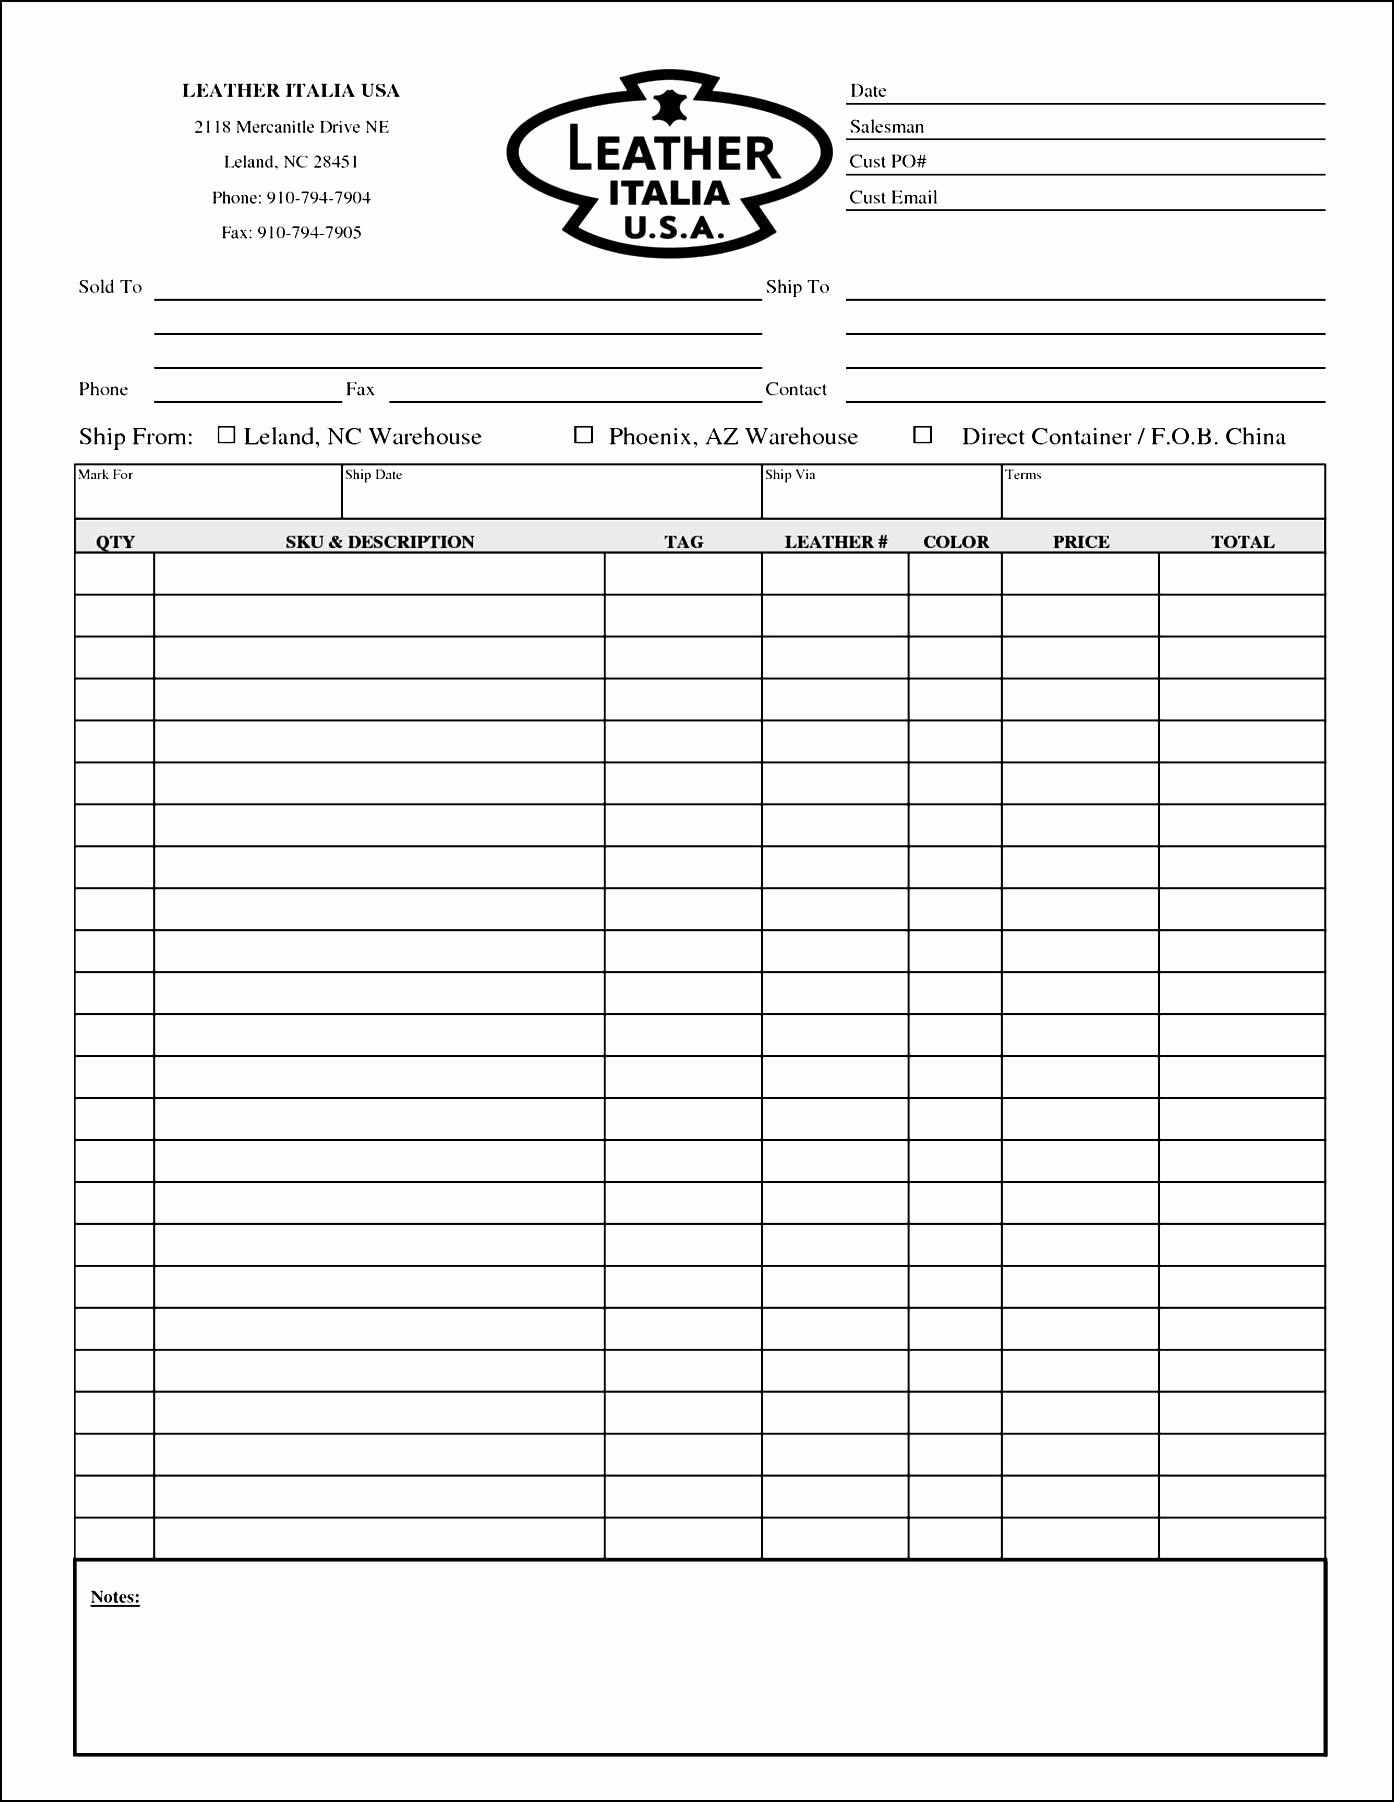 Blank order form Template Excel Awesome Blank order form Template Excel